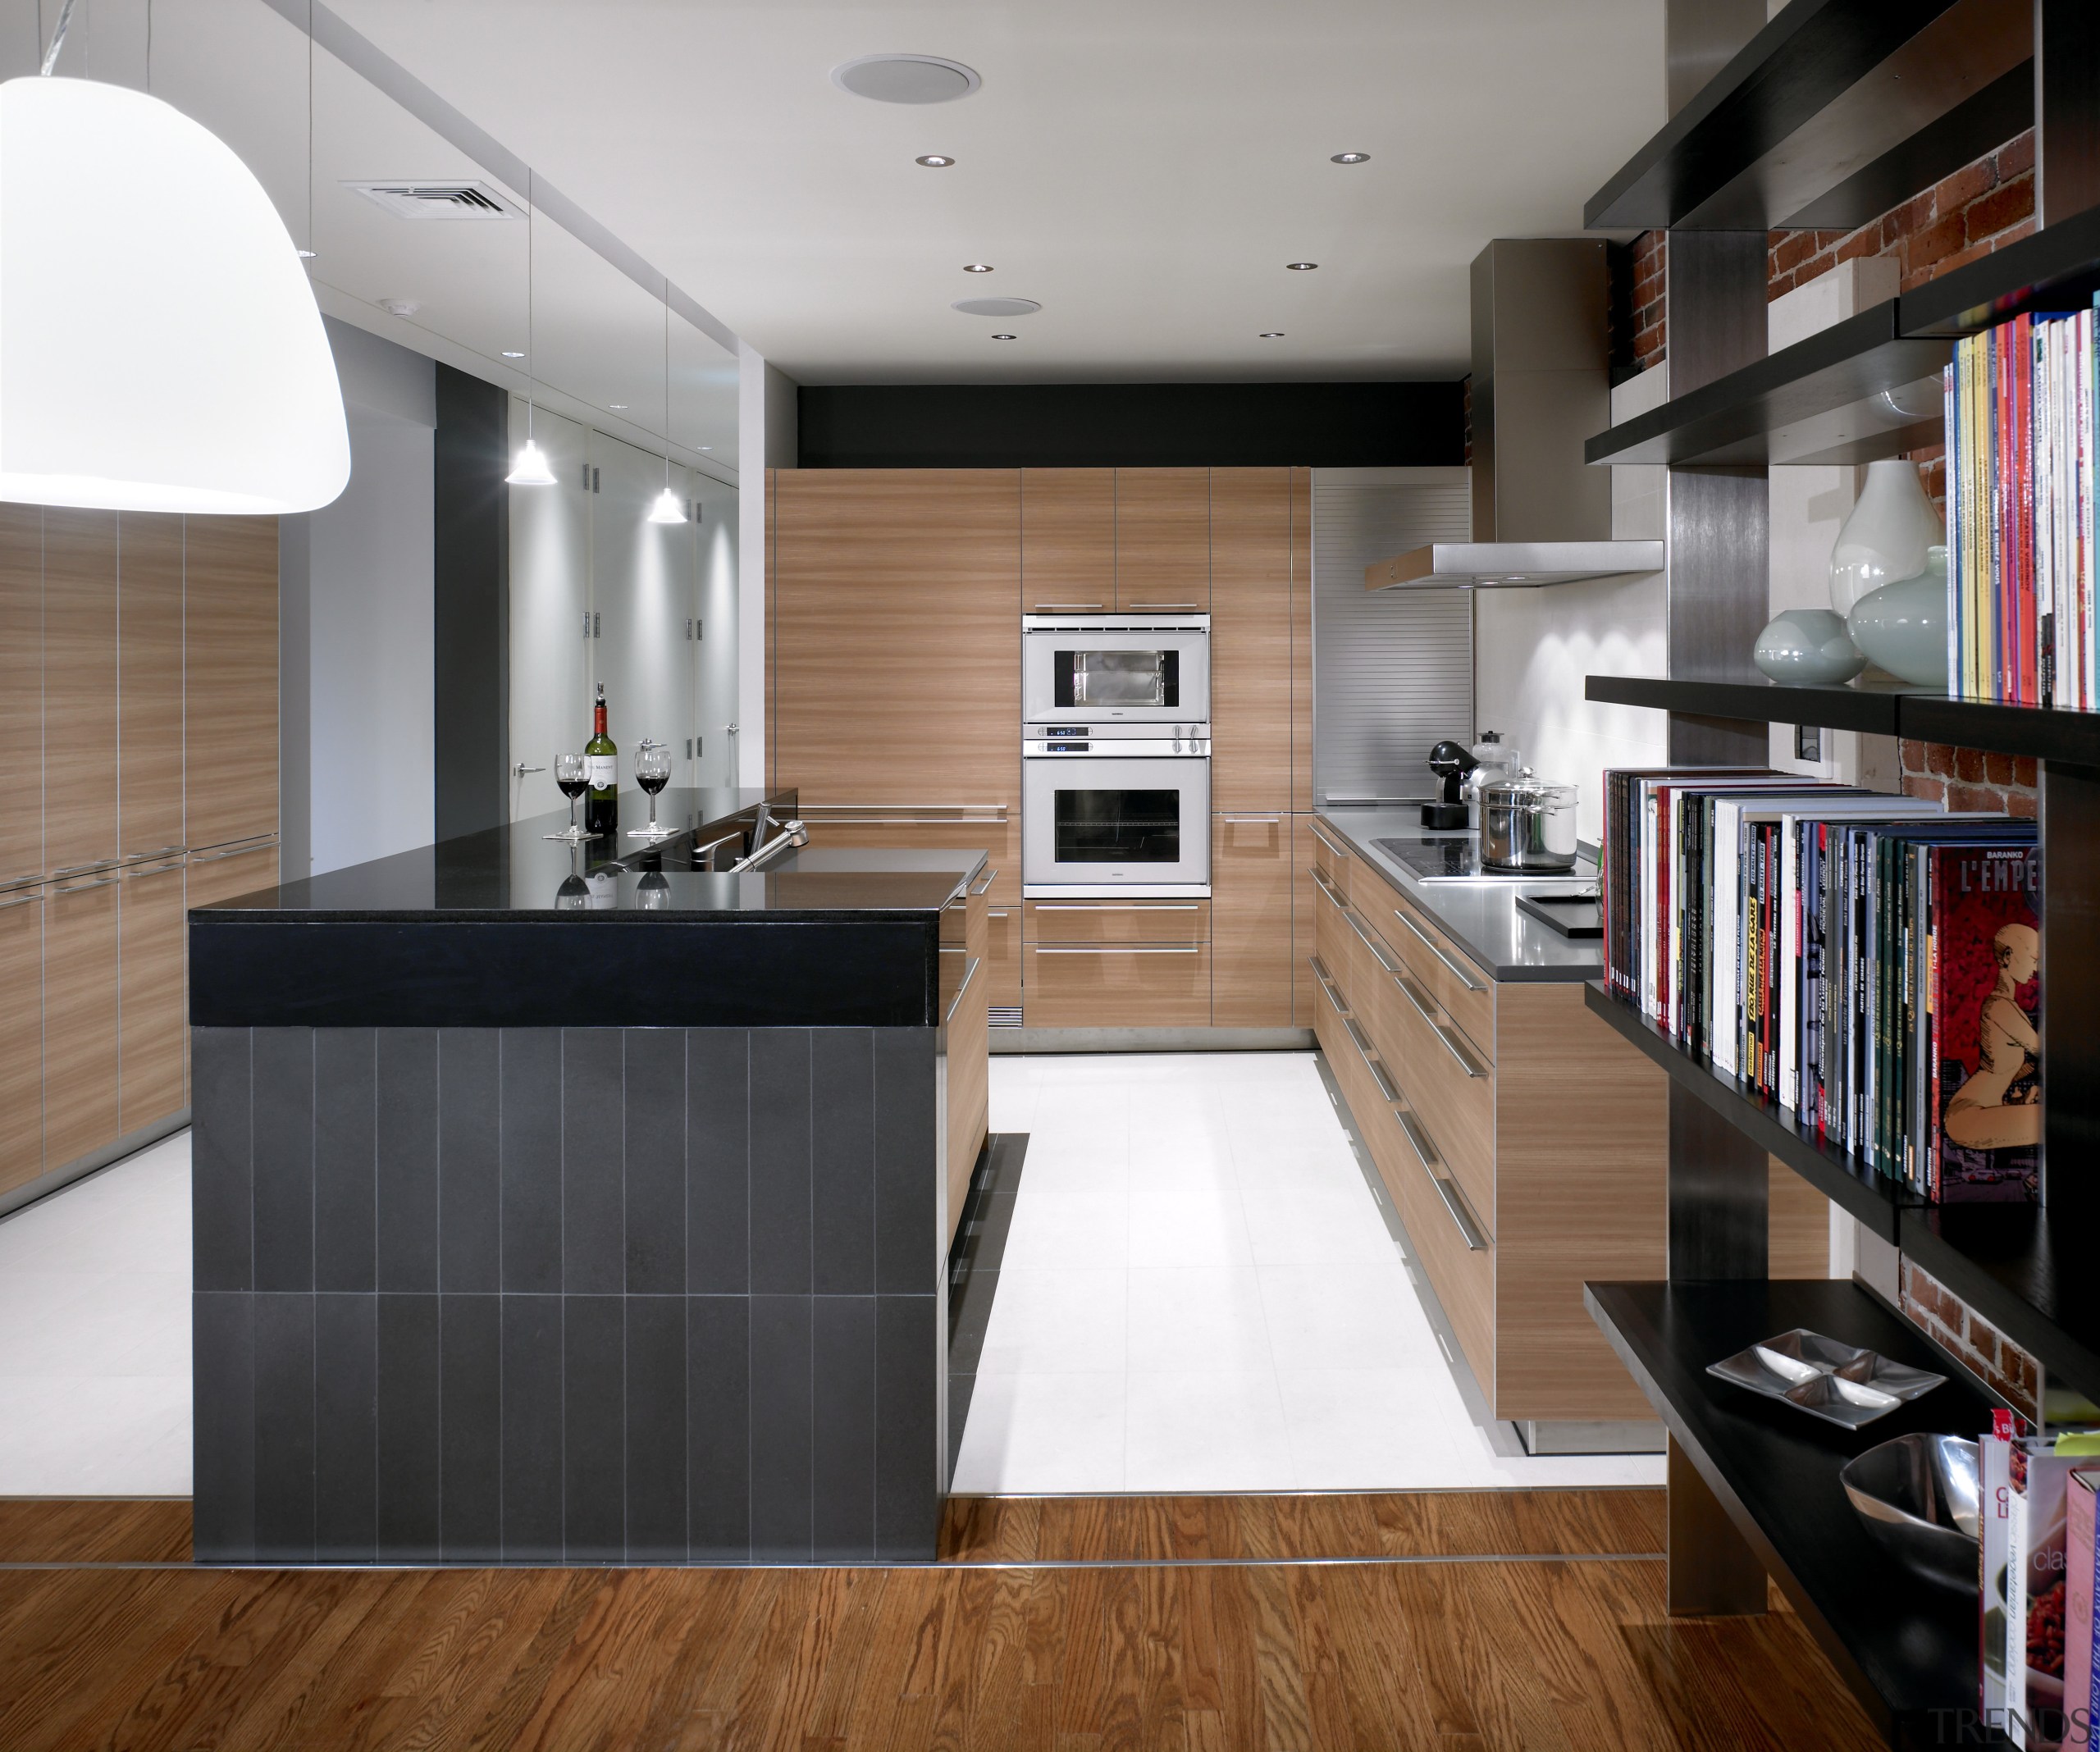 View of a renovated kitchen which features a cabinetry, countertop, cuisine classique, floor, interior design, kitchen, gray, black